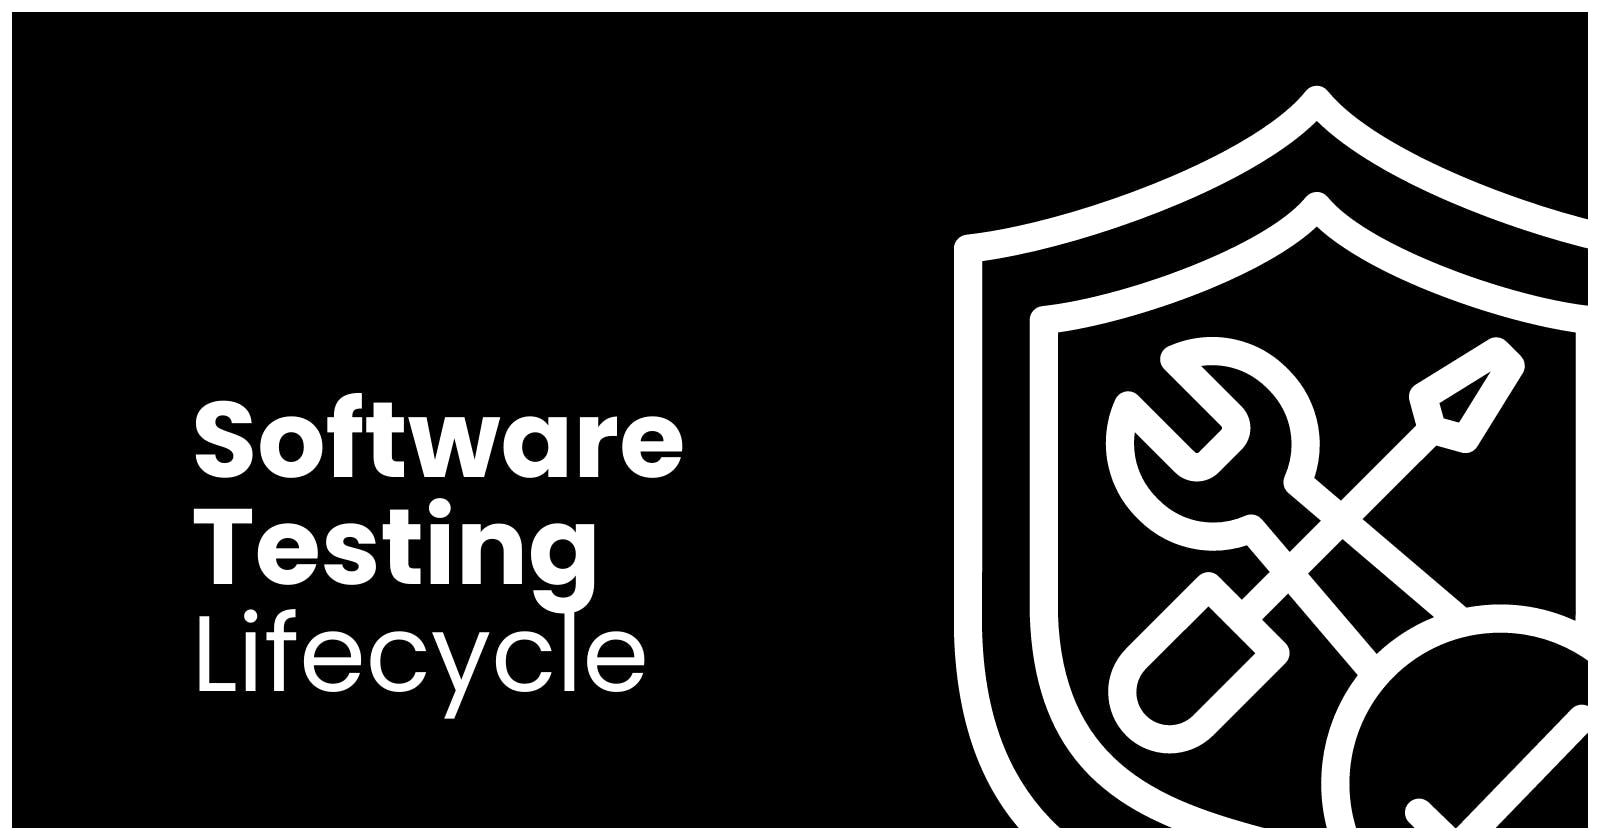 Software Testing Lifecycle (STLC)